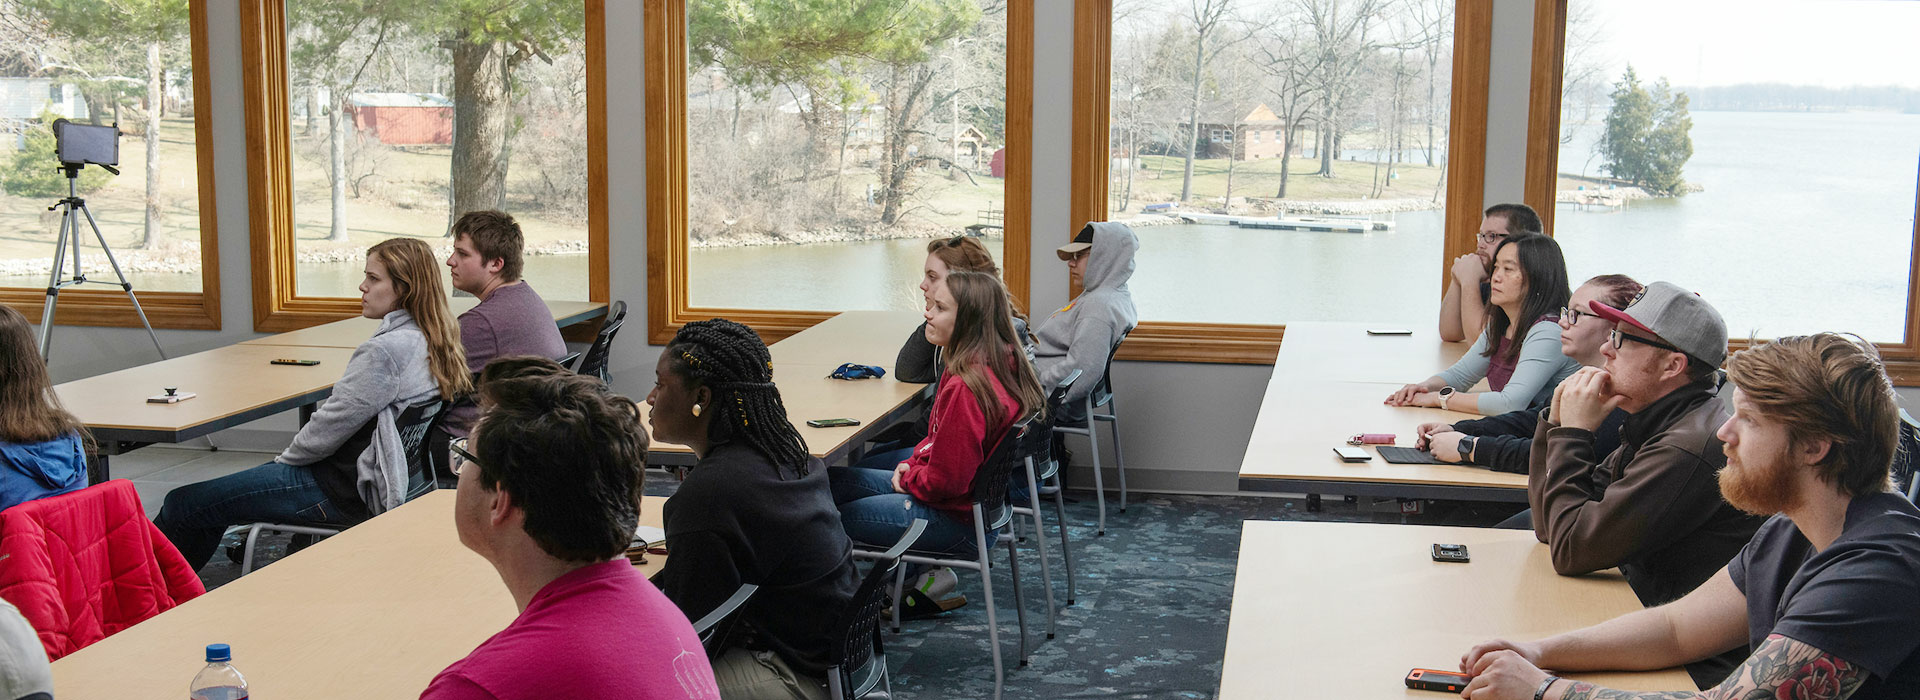 students in lake field station classroom